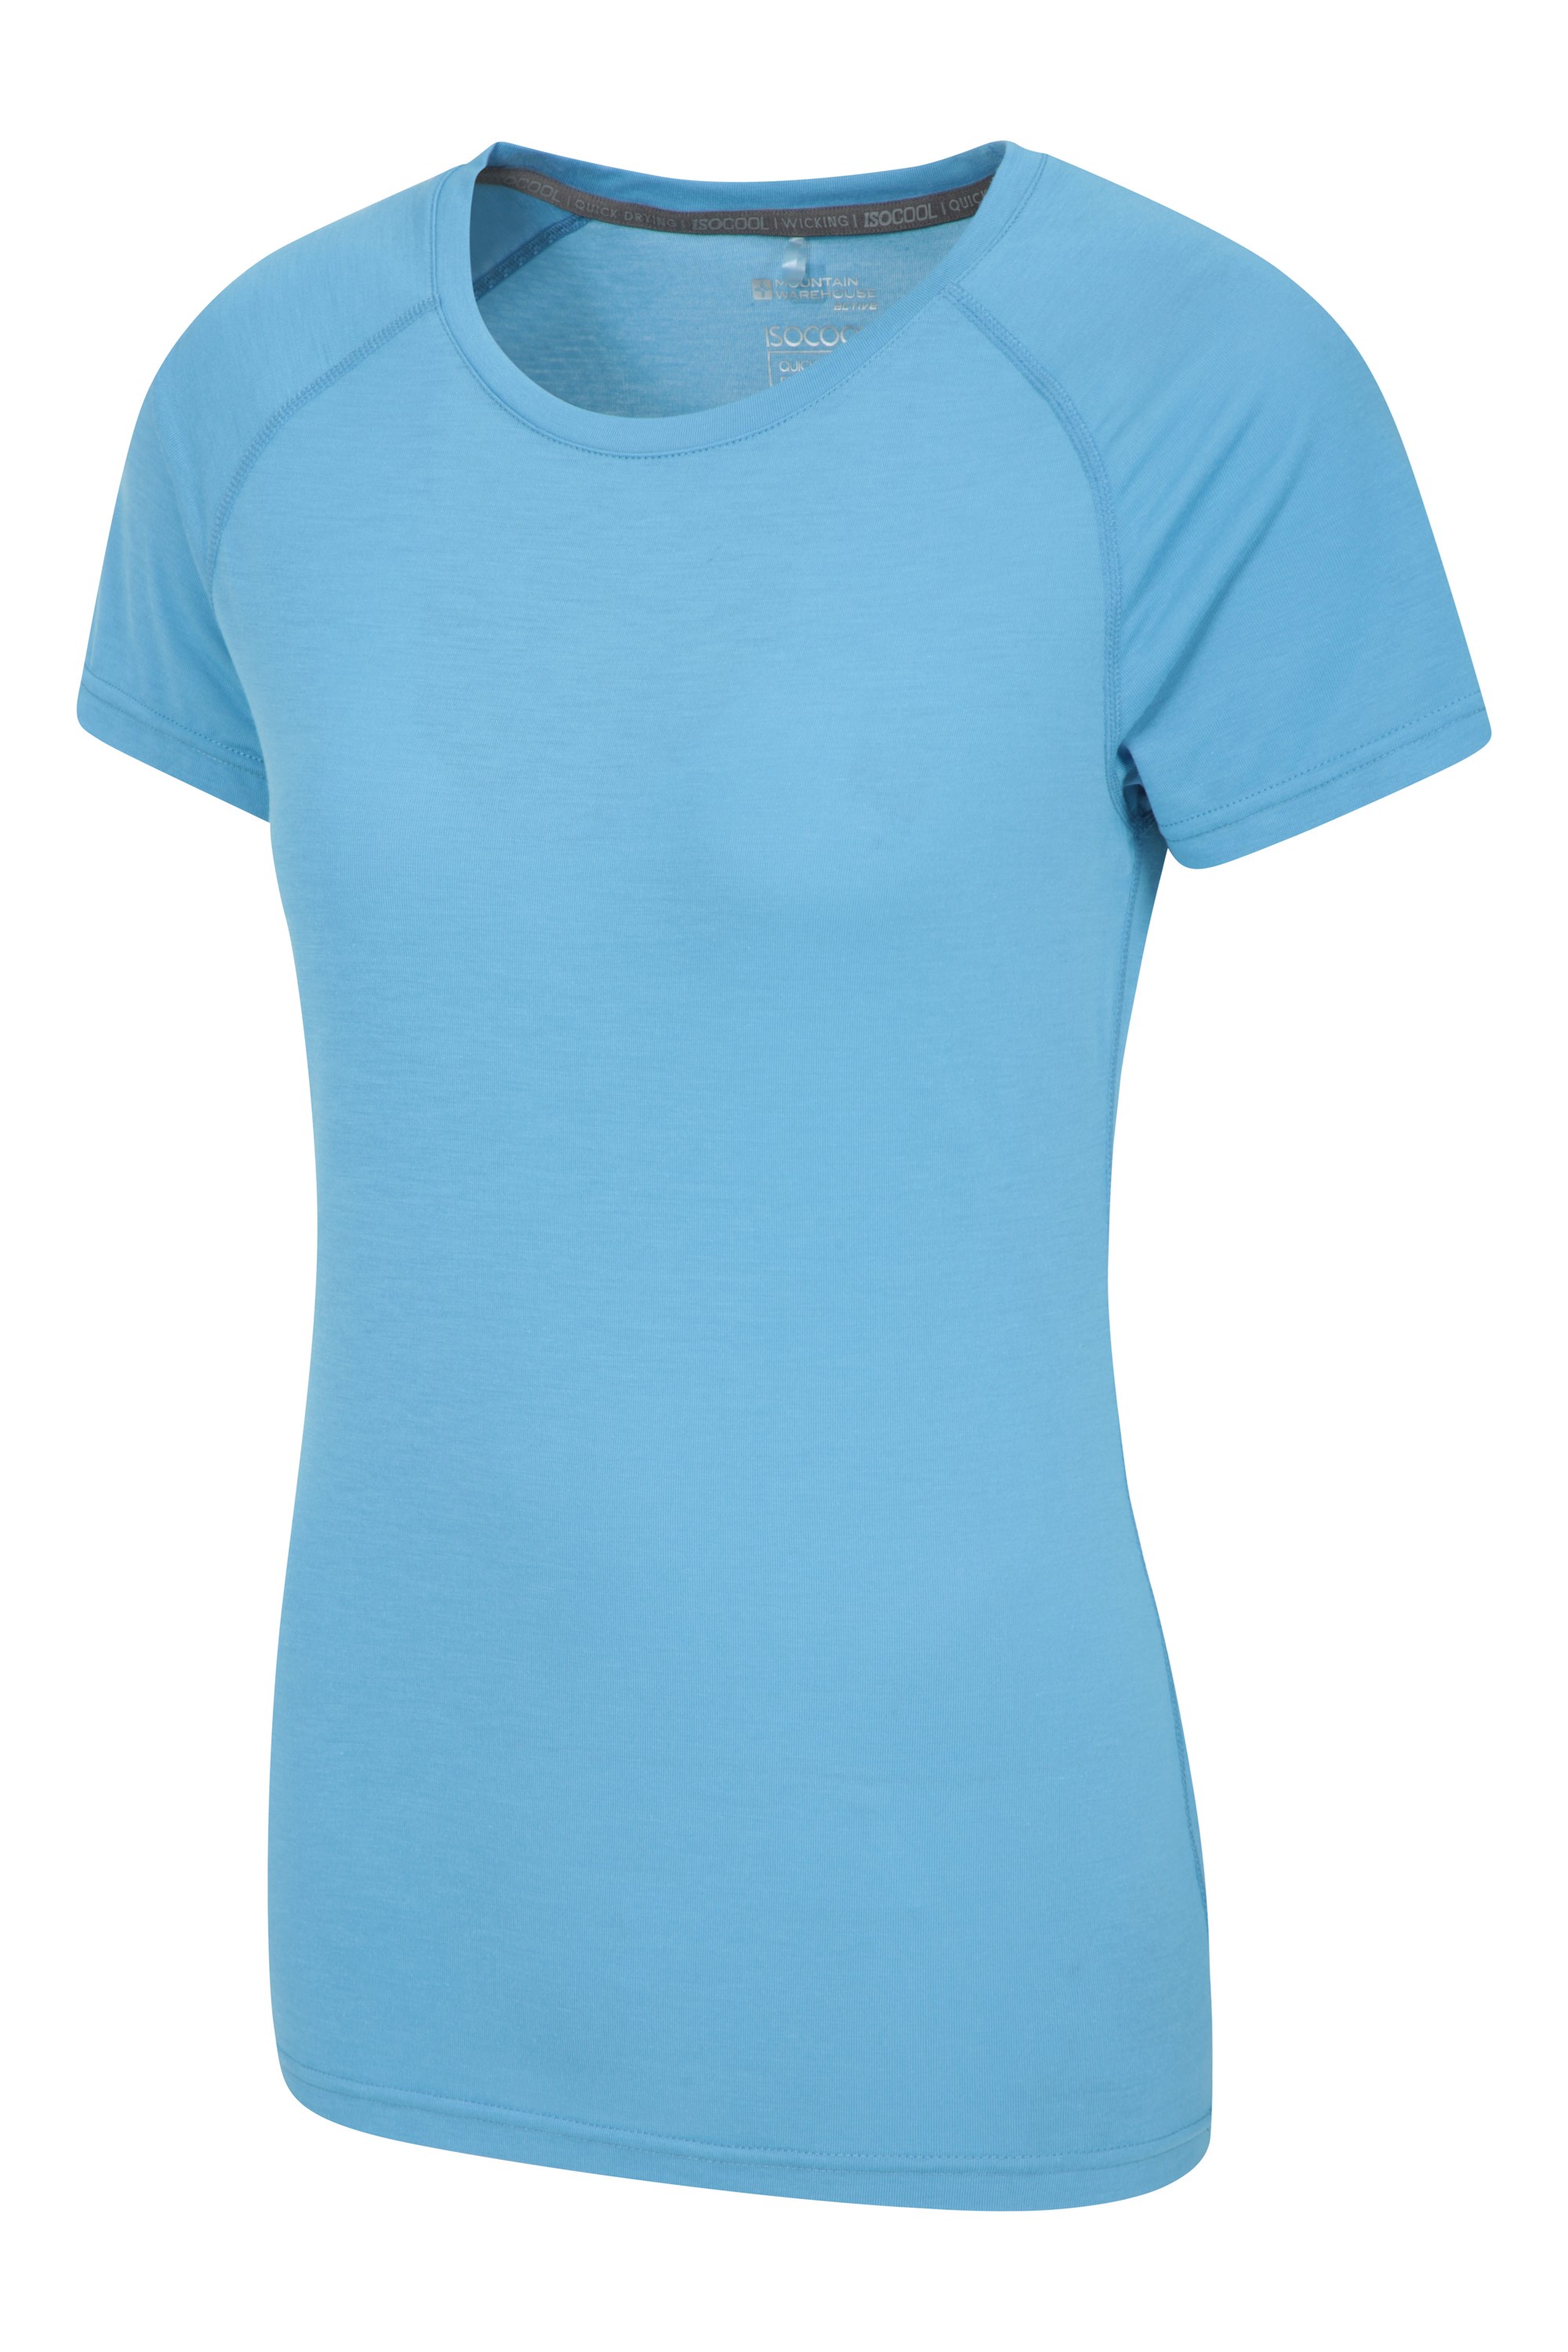 Outdoor Sports Walking T-Shirt Women's Thin Quick Dry Clothes Loose - China  Sportswear and T-Shirt price